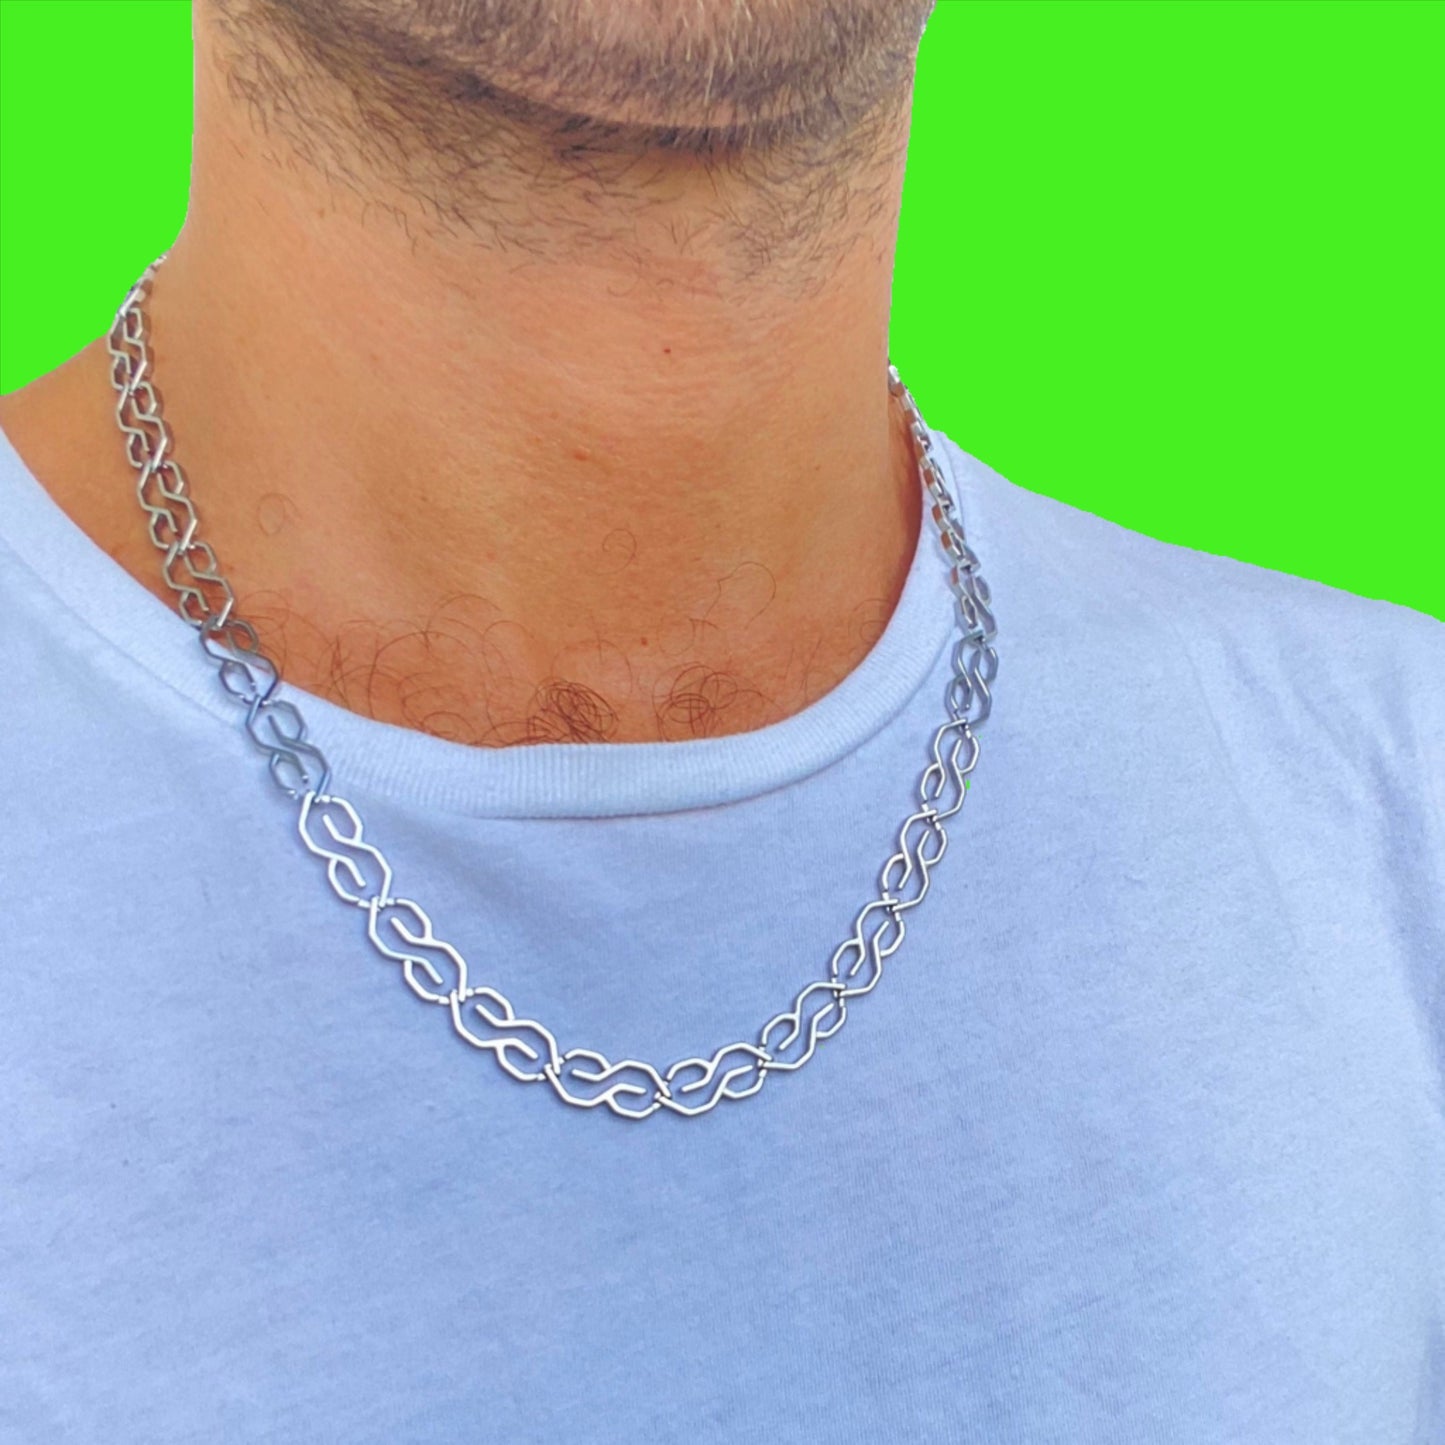 The S Thing Chain Necklace™ - SMALL S - SILVER